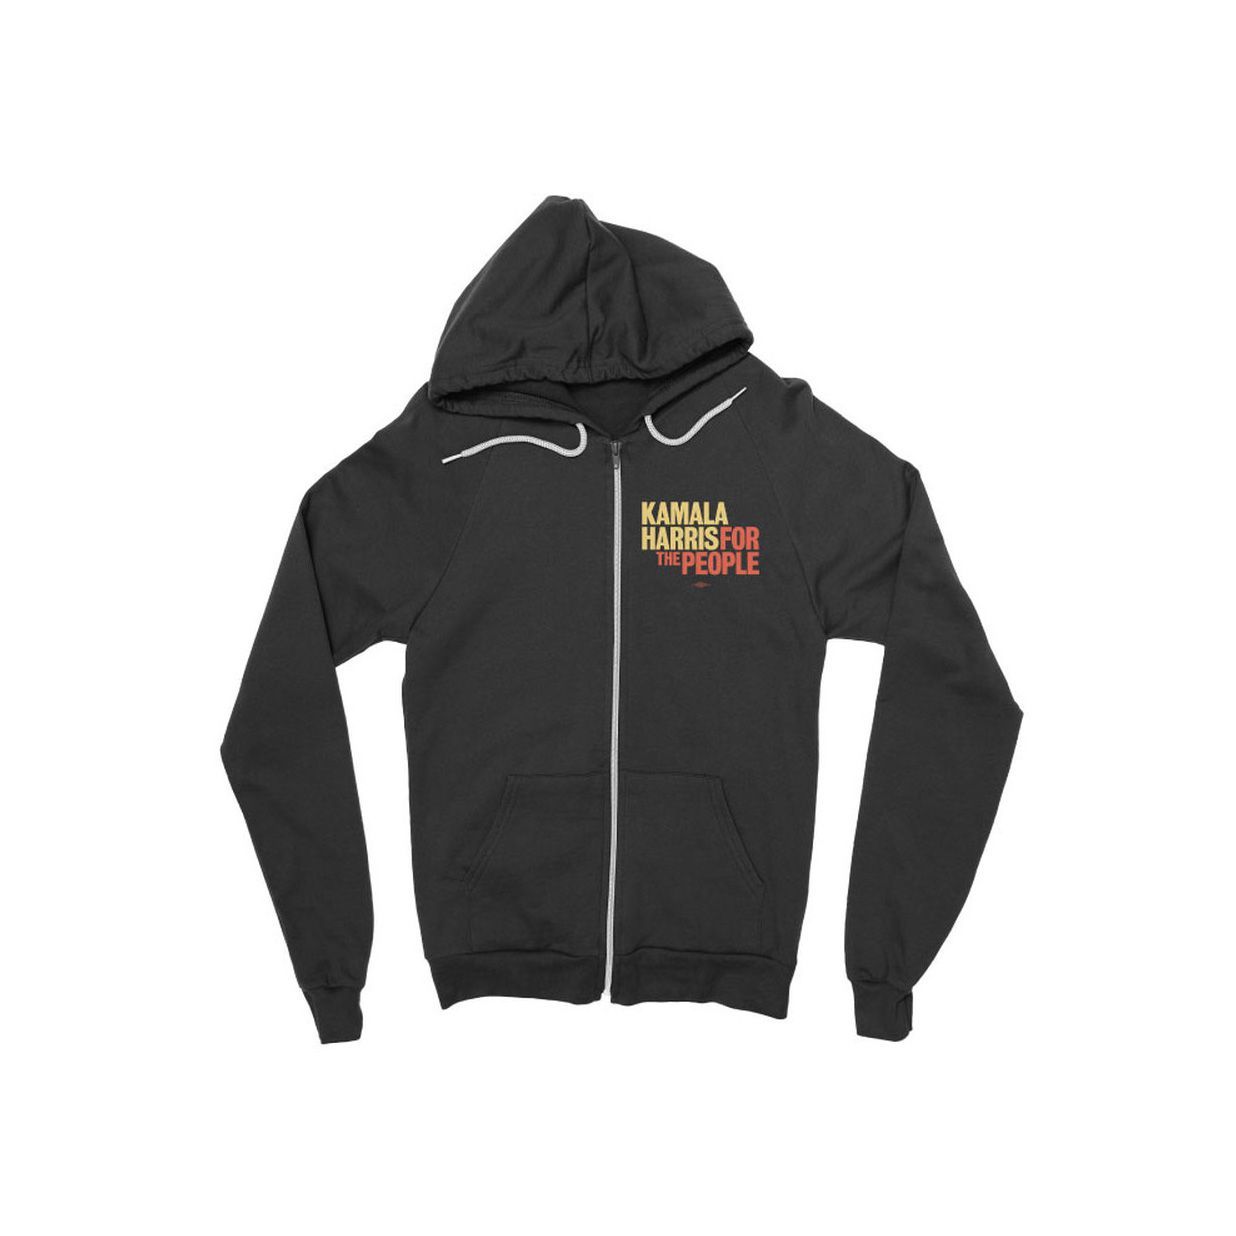 For The People Hoodie